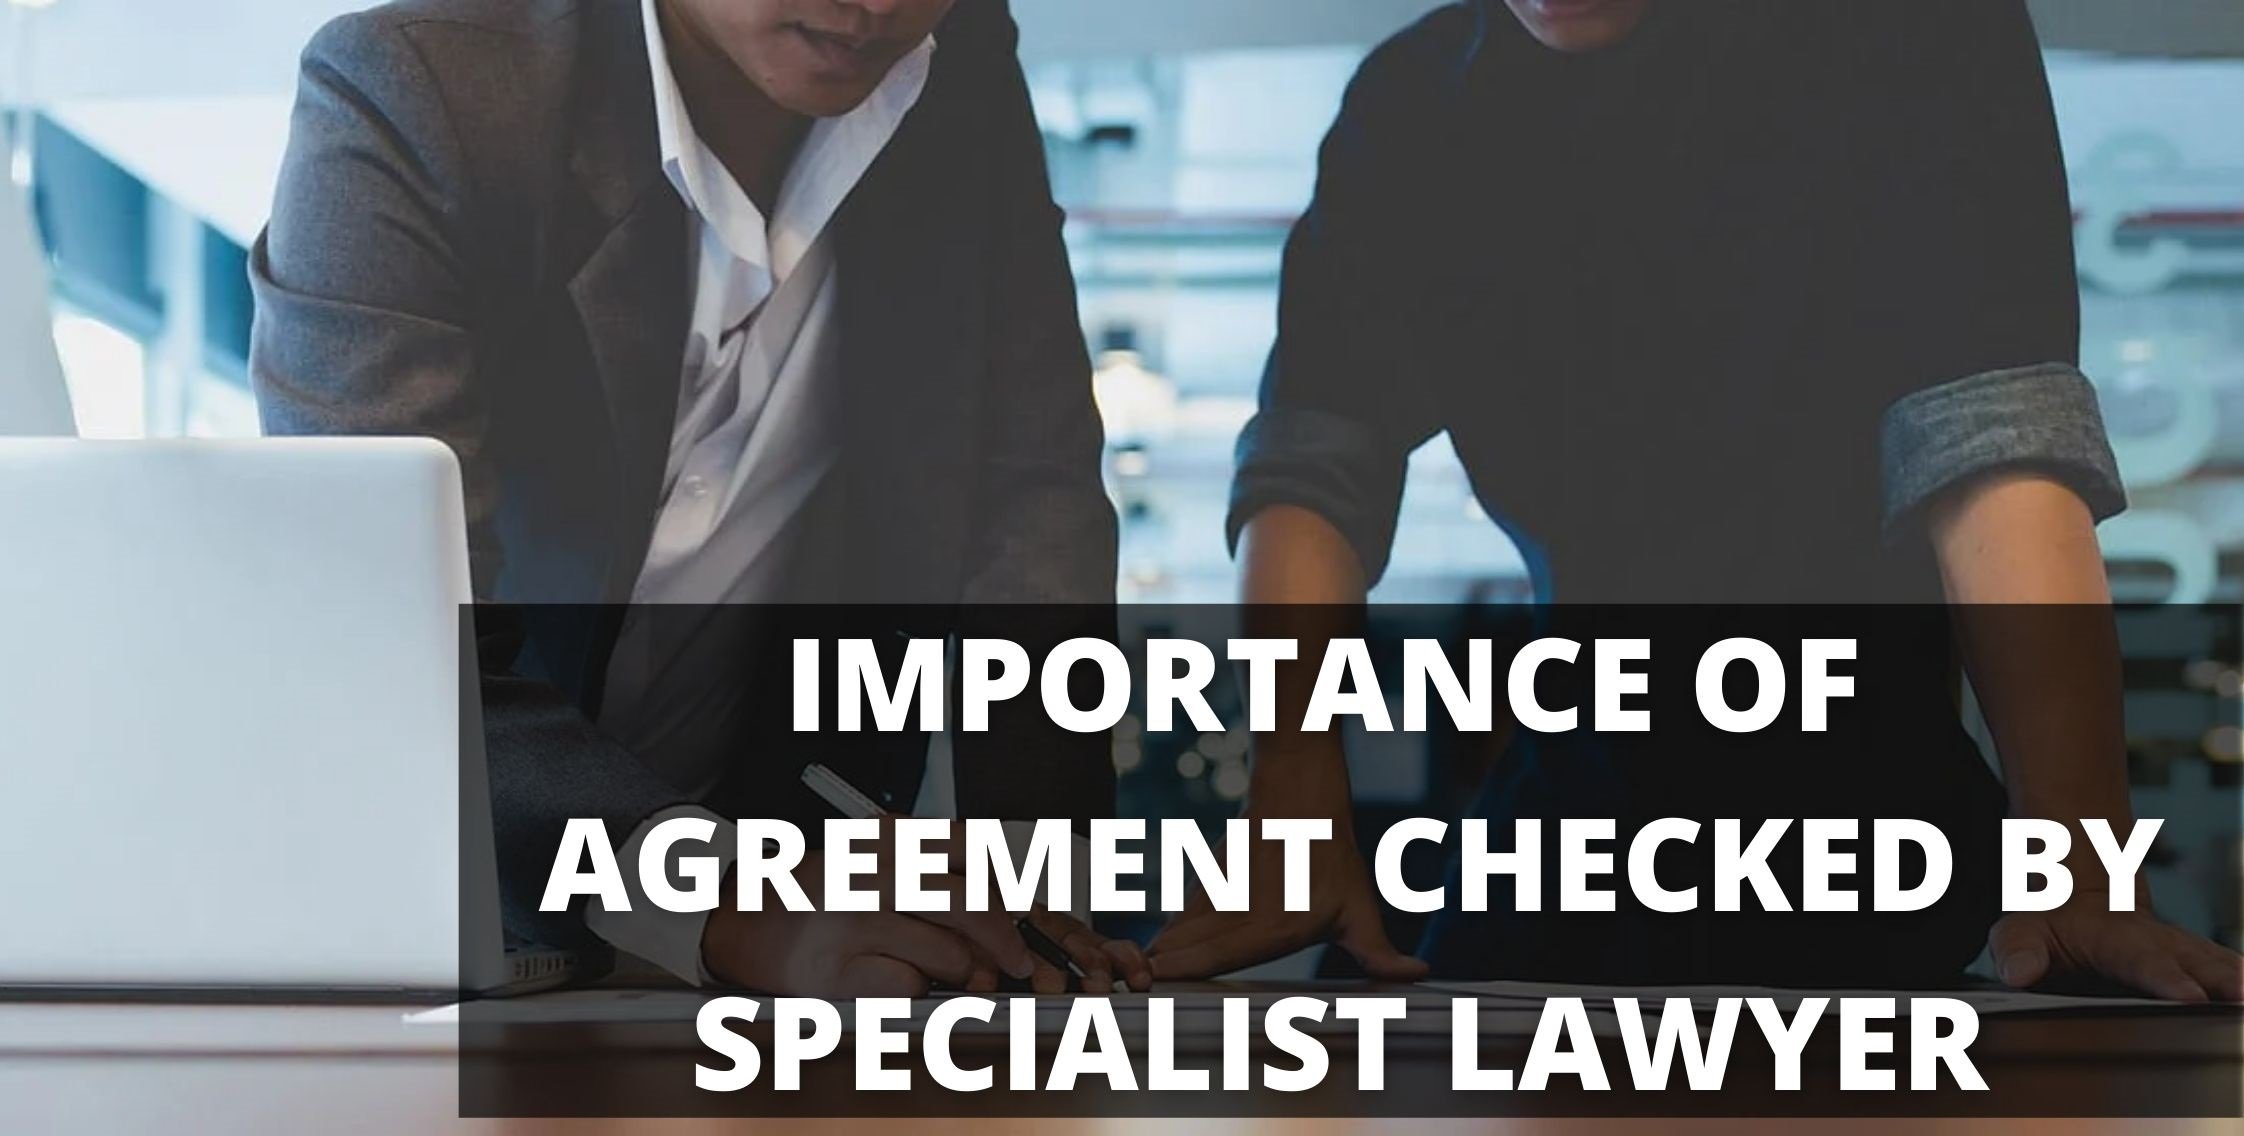 WHY IS IT IMPORTANT TO HAVE A FRANCHISE AGREEMENT CHECKED BY A SPECIALIST LAWYER?